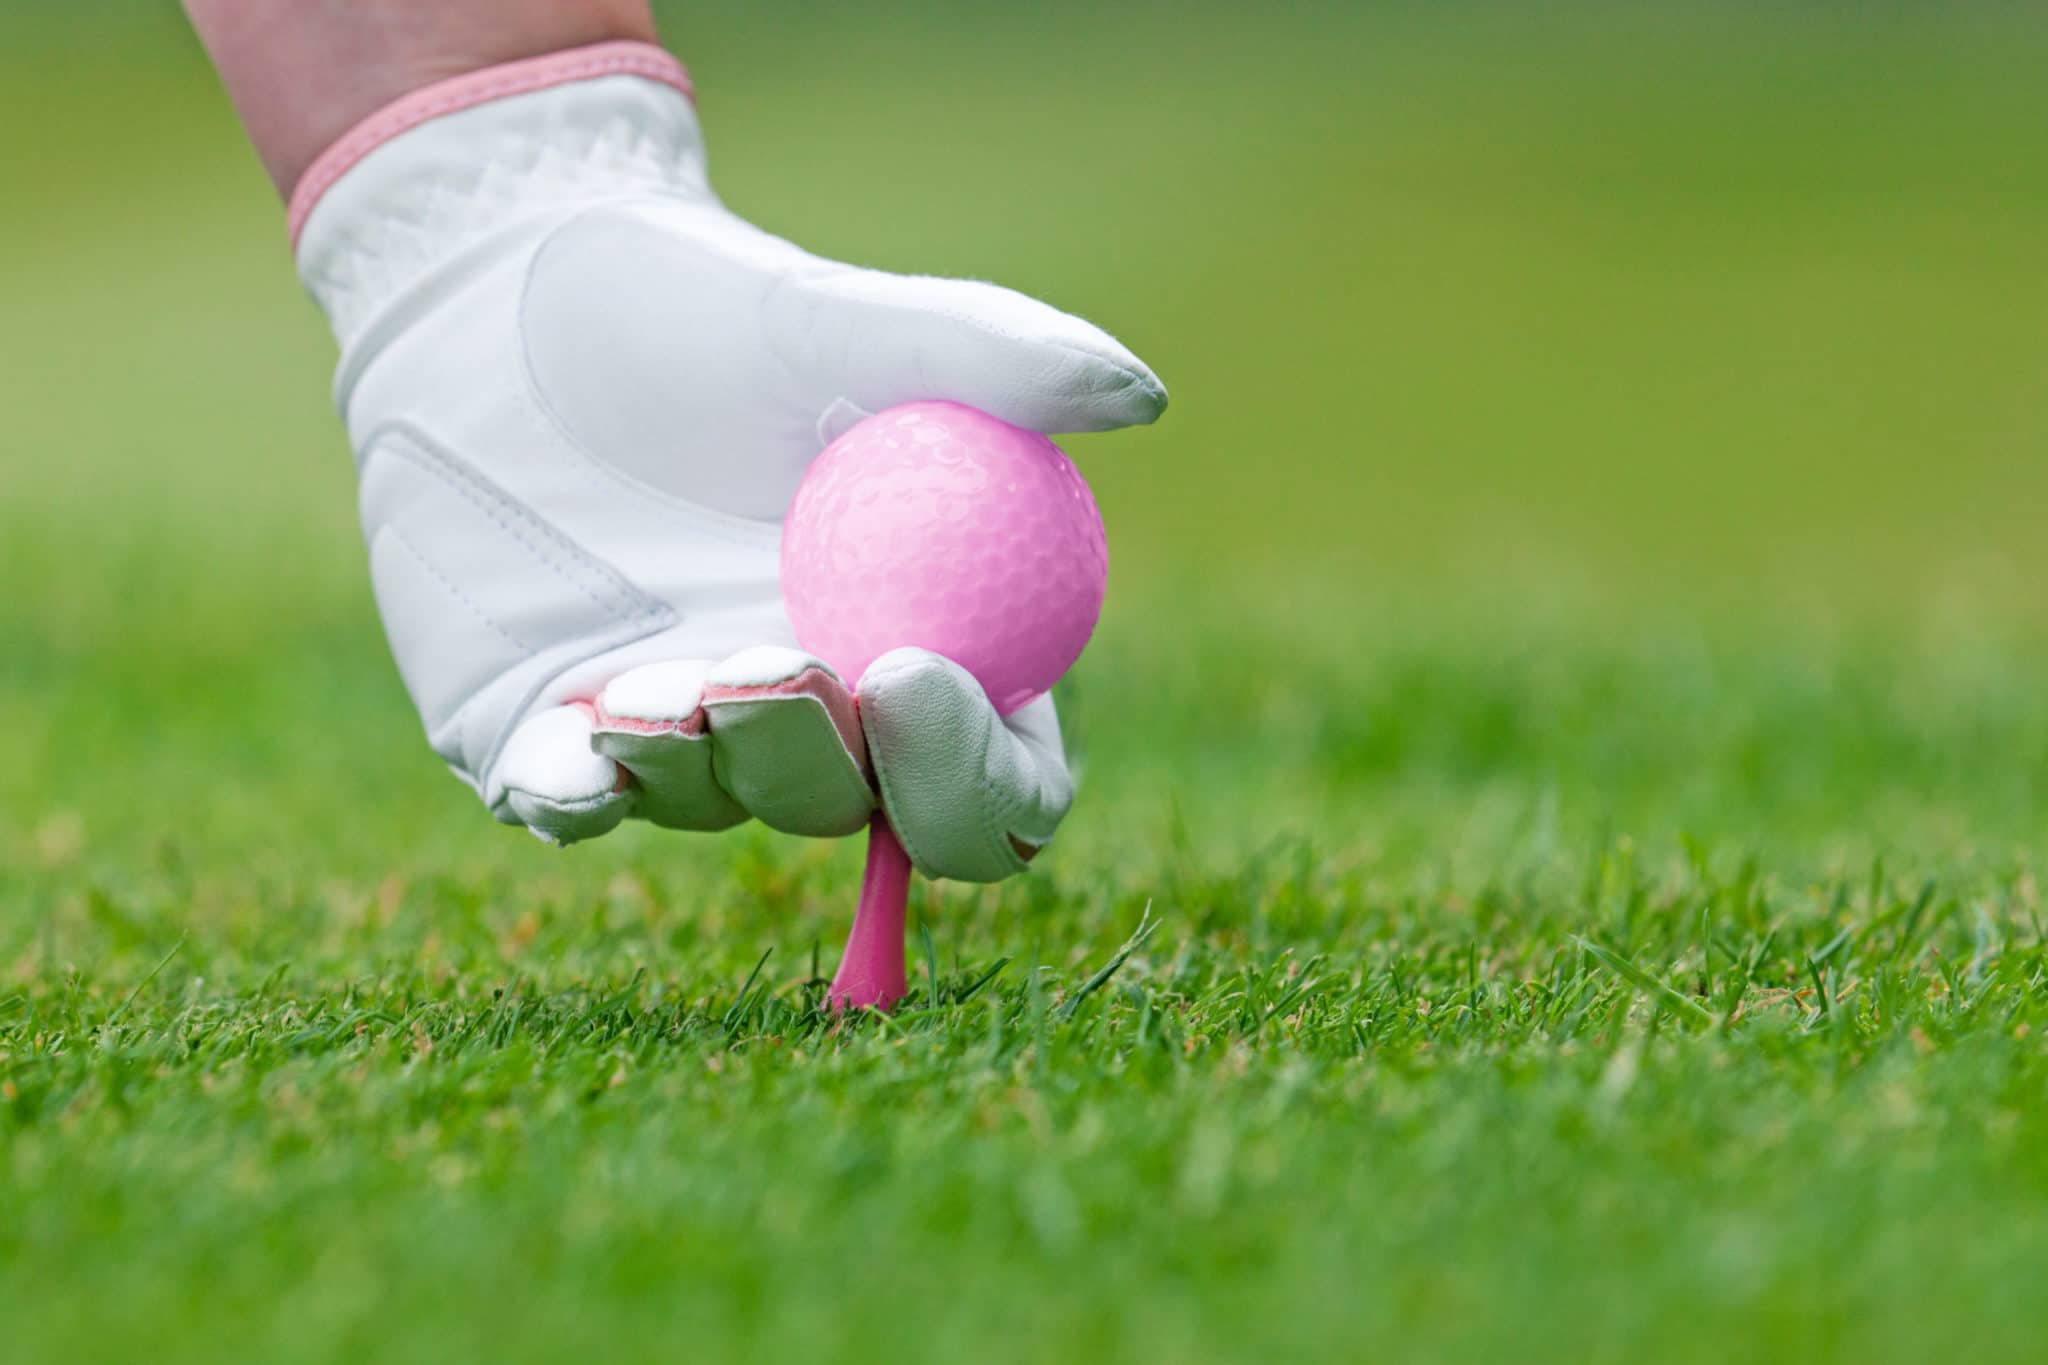 A hand holding a pink golf ball and placing it on the golf tee